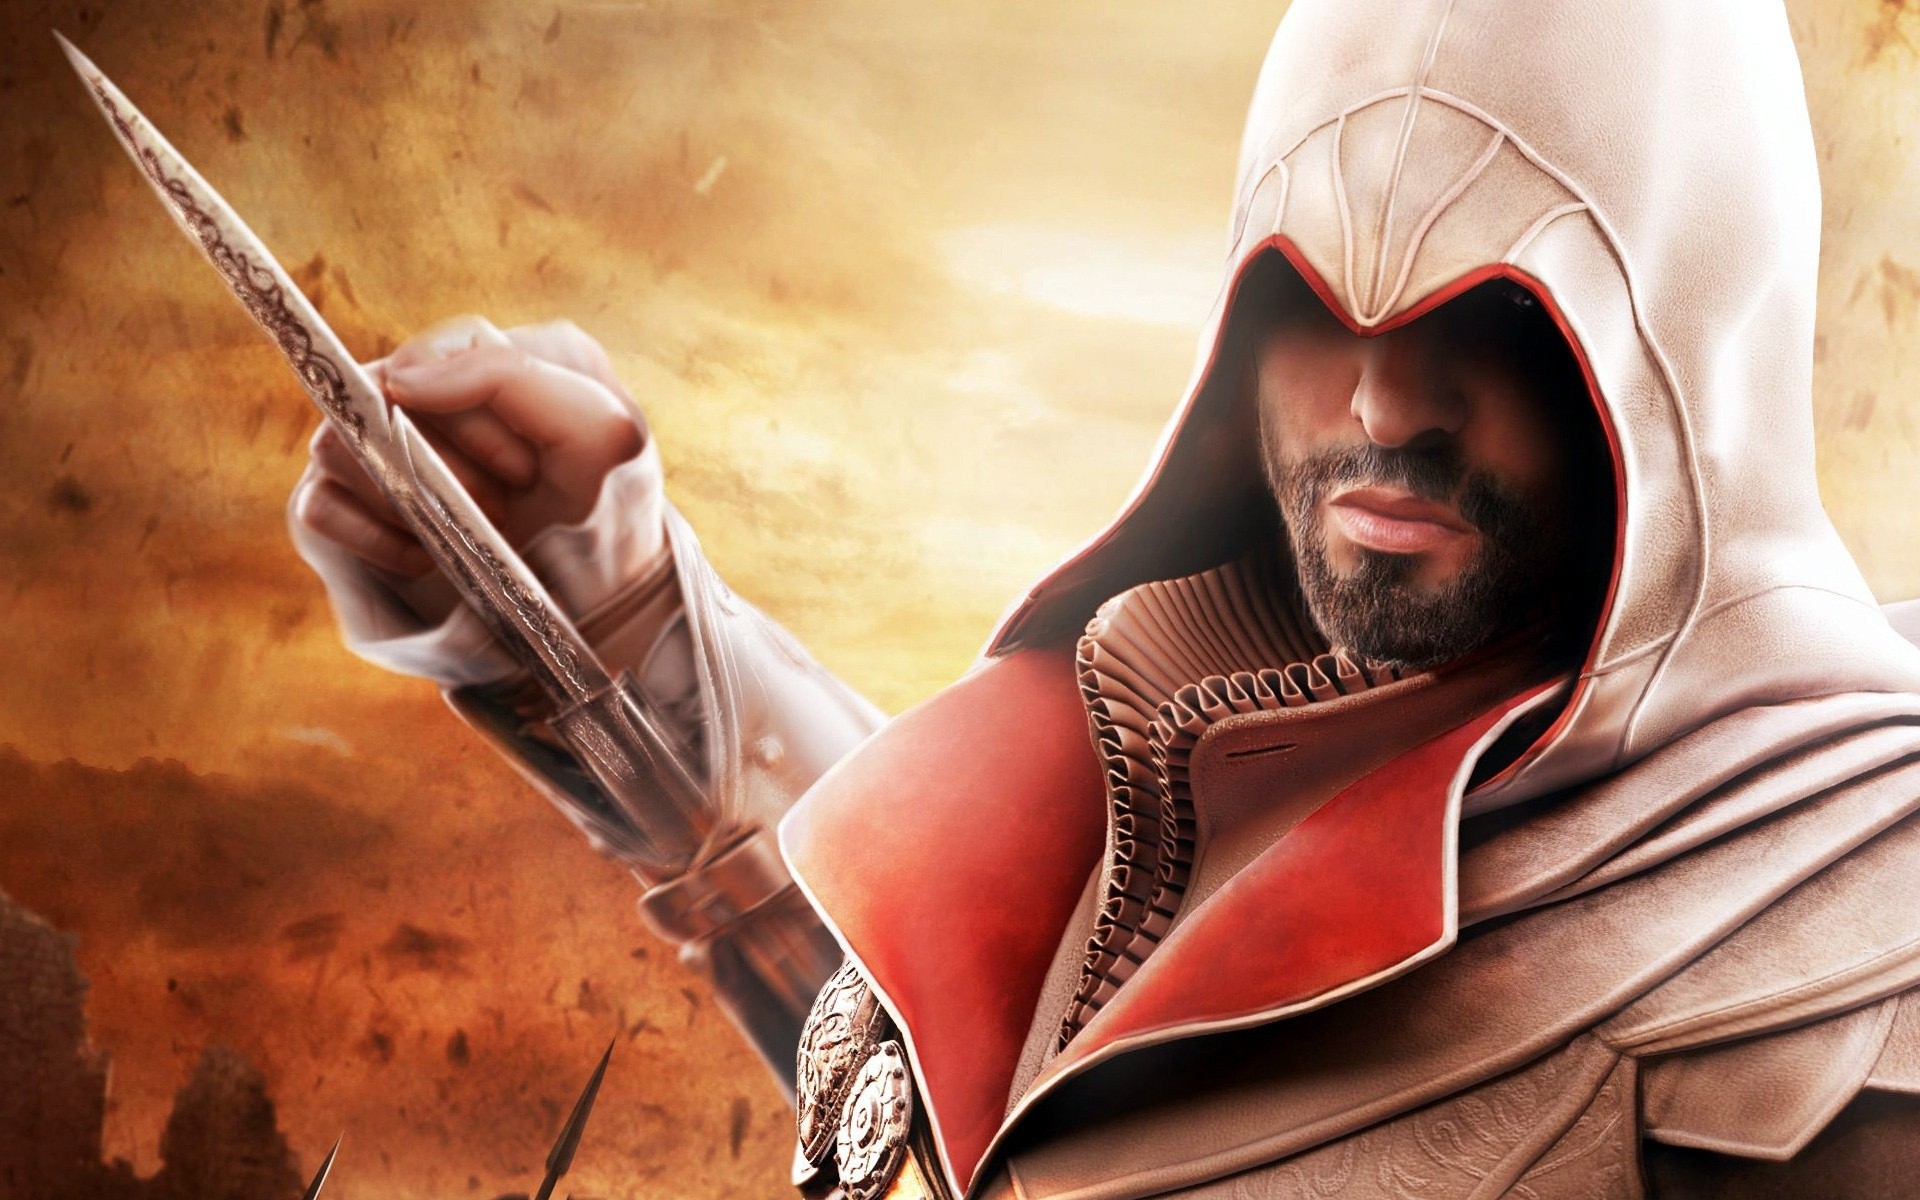 Ezio, the protagonist from Assassin's Creed: Brotherhood, in a dynamic video game scene.